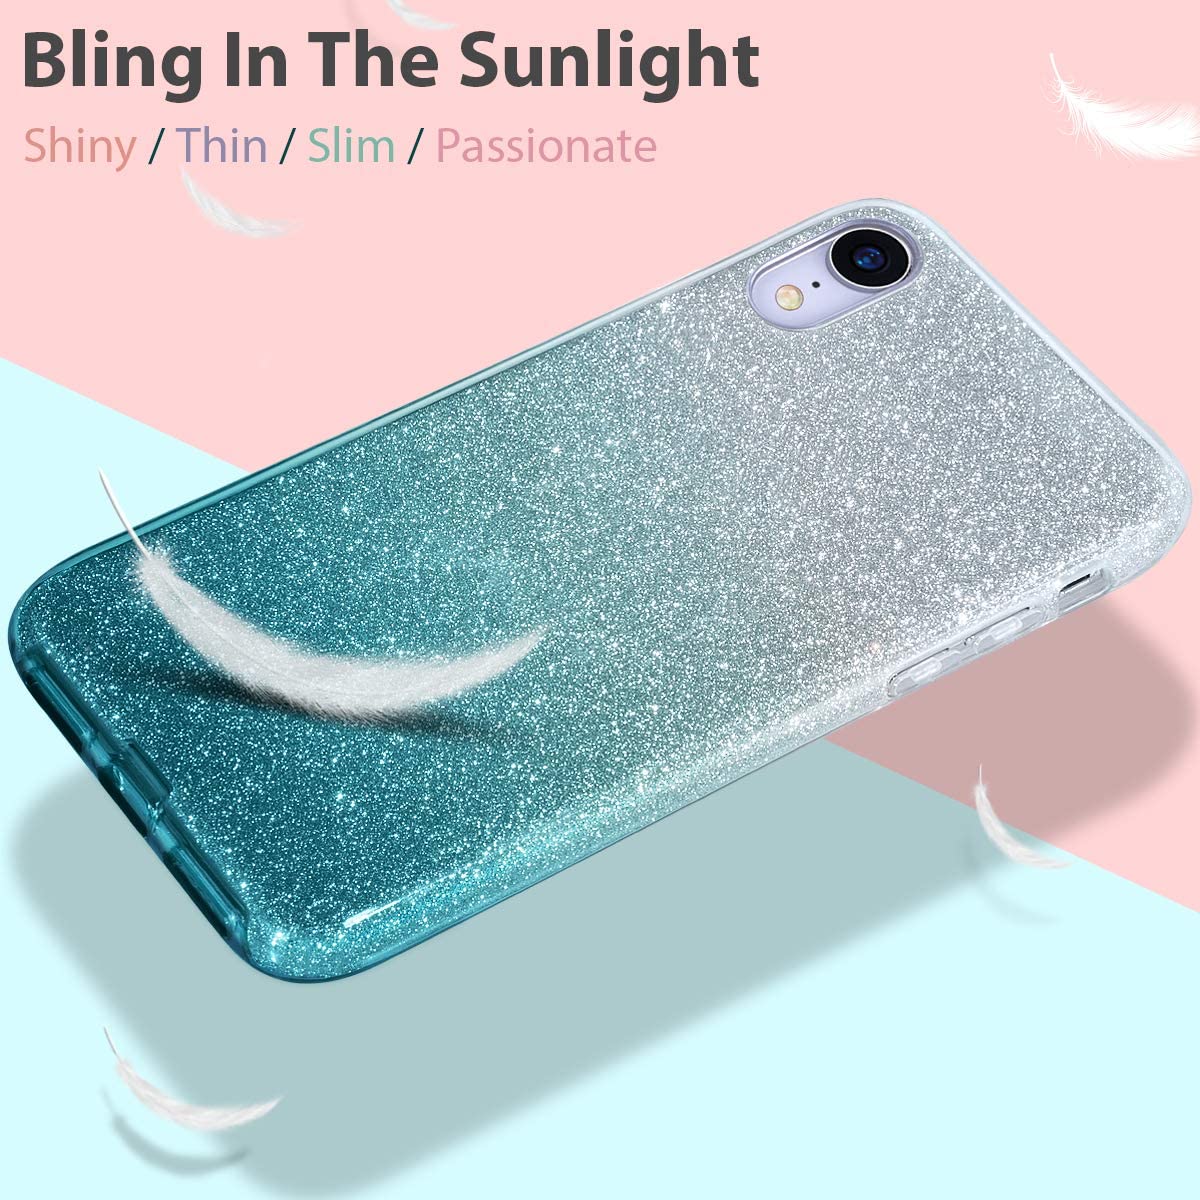 iPhone XR Case Clear Crystal Shiny Glitter Sparkly Bling Cute Thin Slim Girls Case for iPhone XR 6.1''(Gradient Green) - e4cents